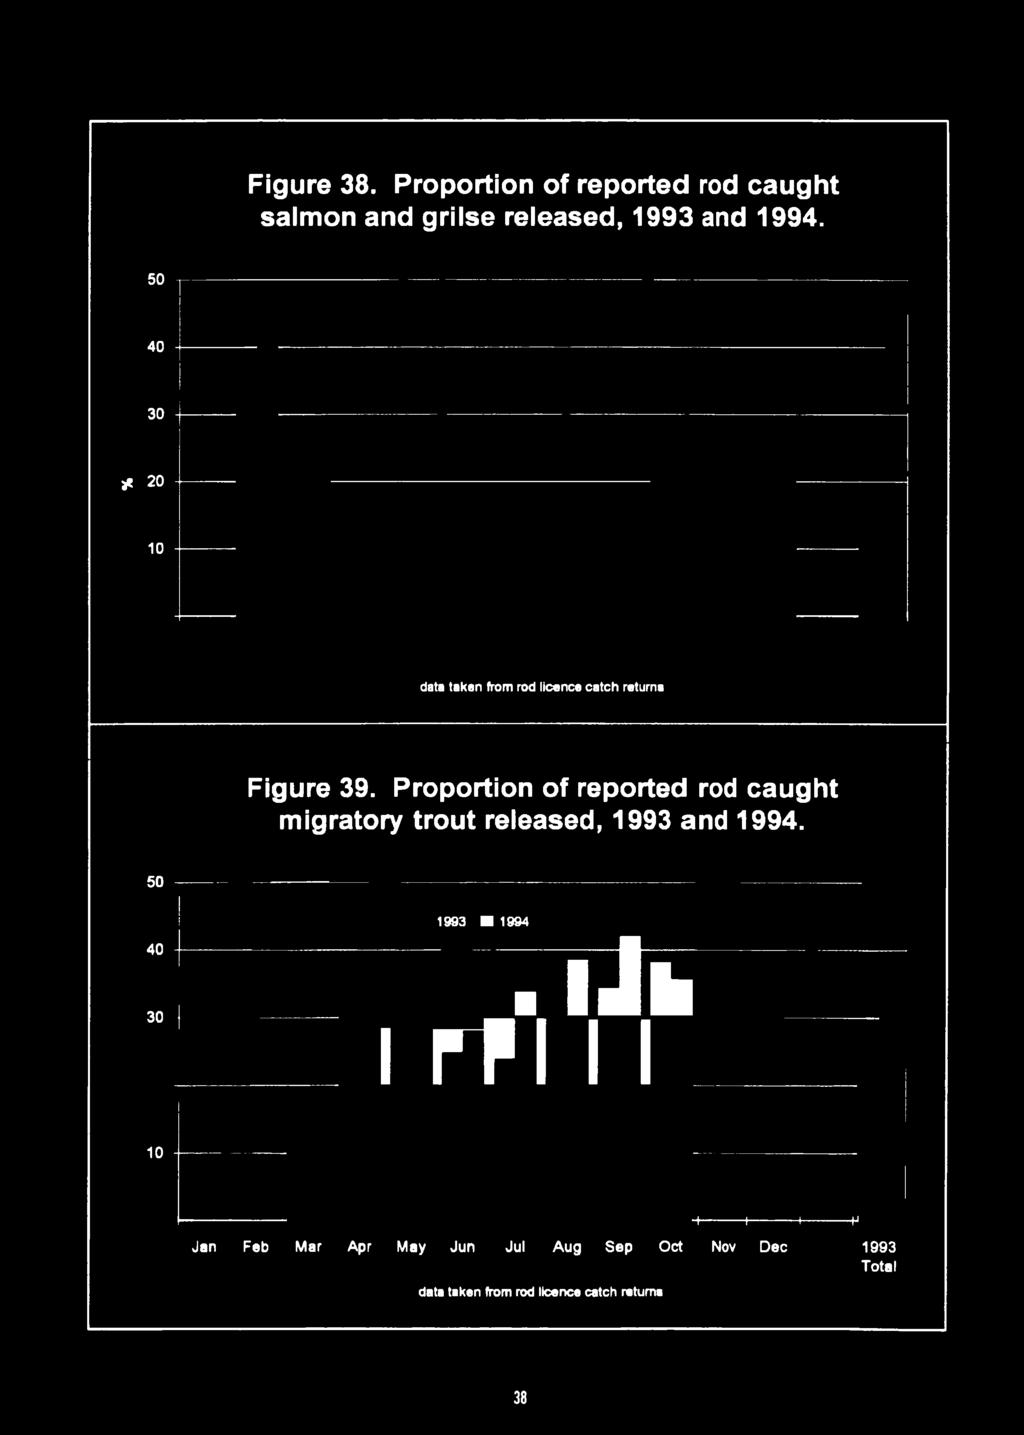 Proportion of reported rod caught migratory trout released, 1993  50